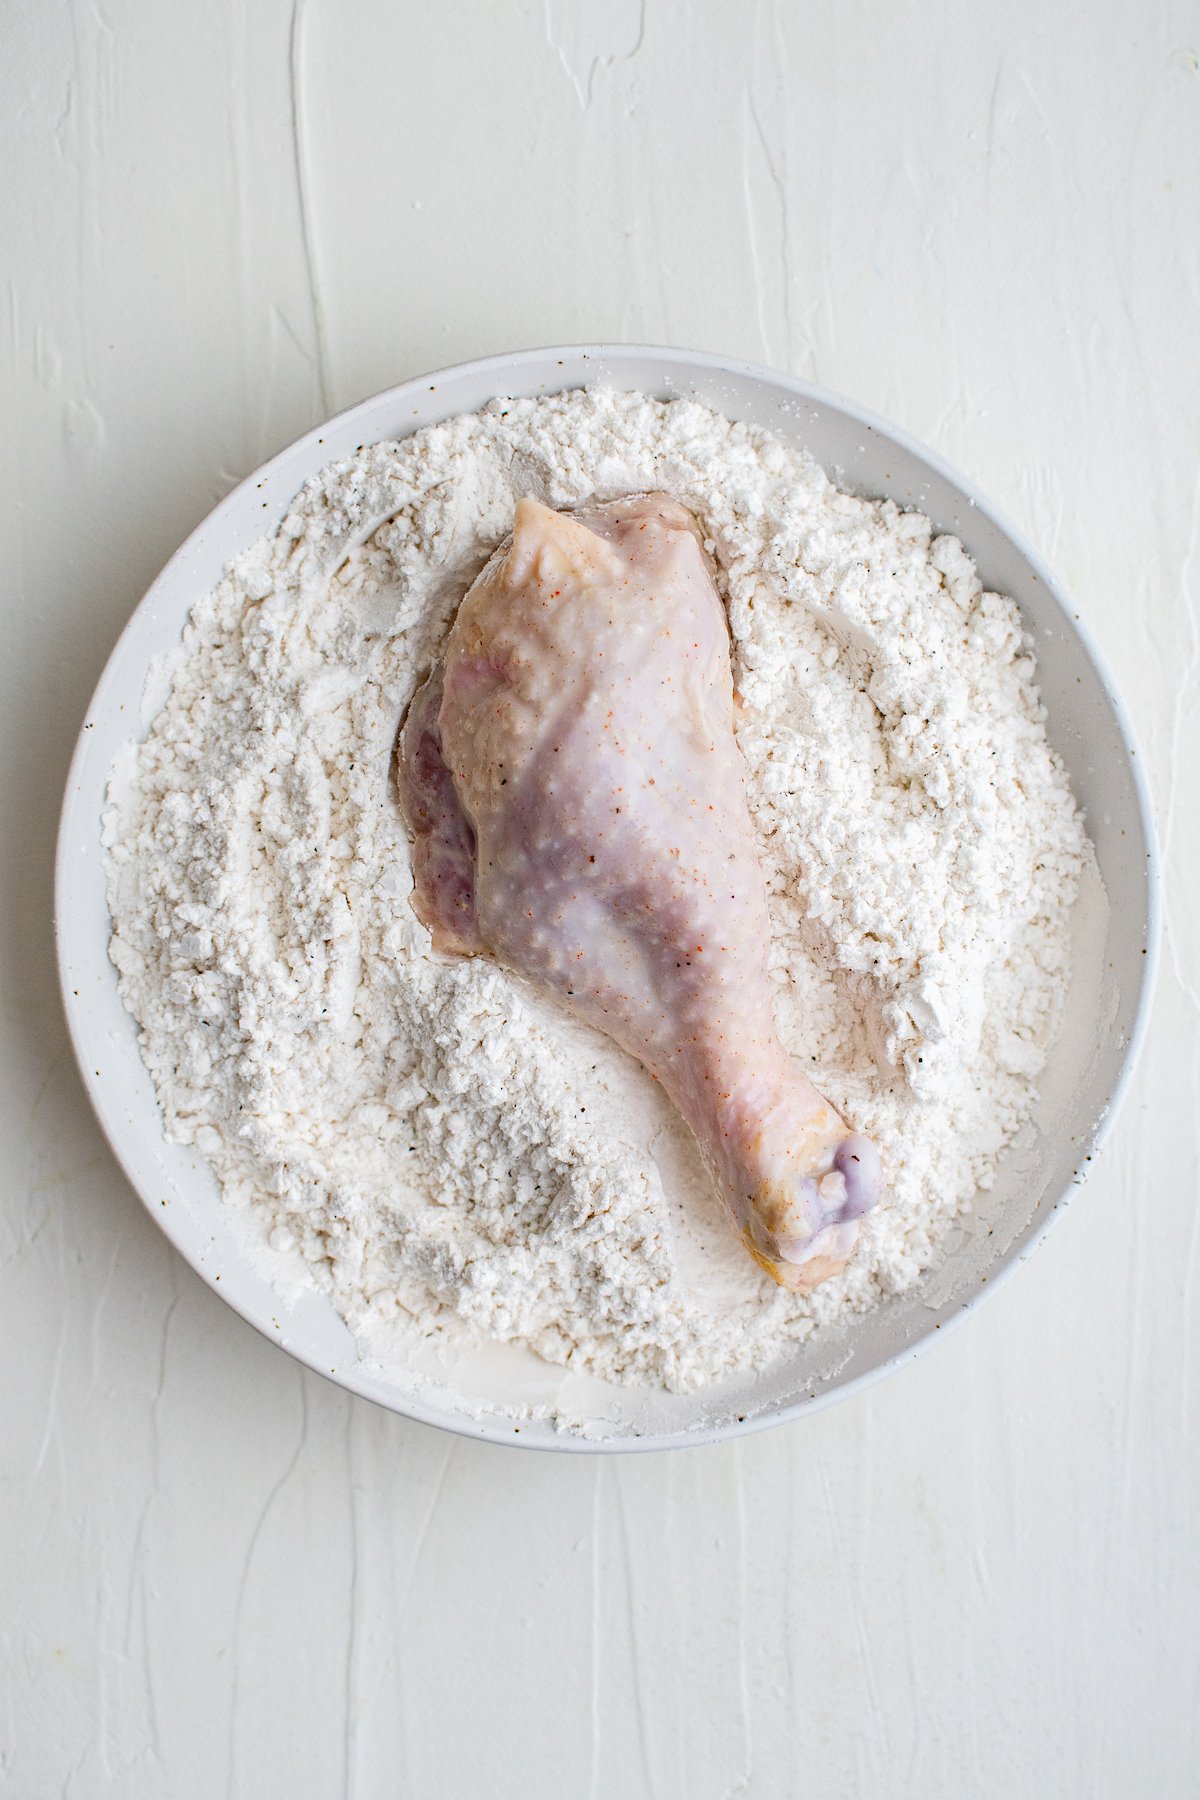 A chicken leg is placed in a white bowl filled with flour. 